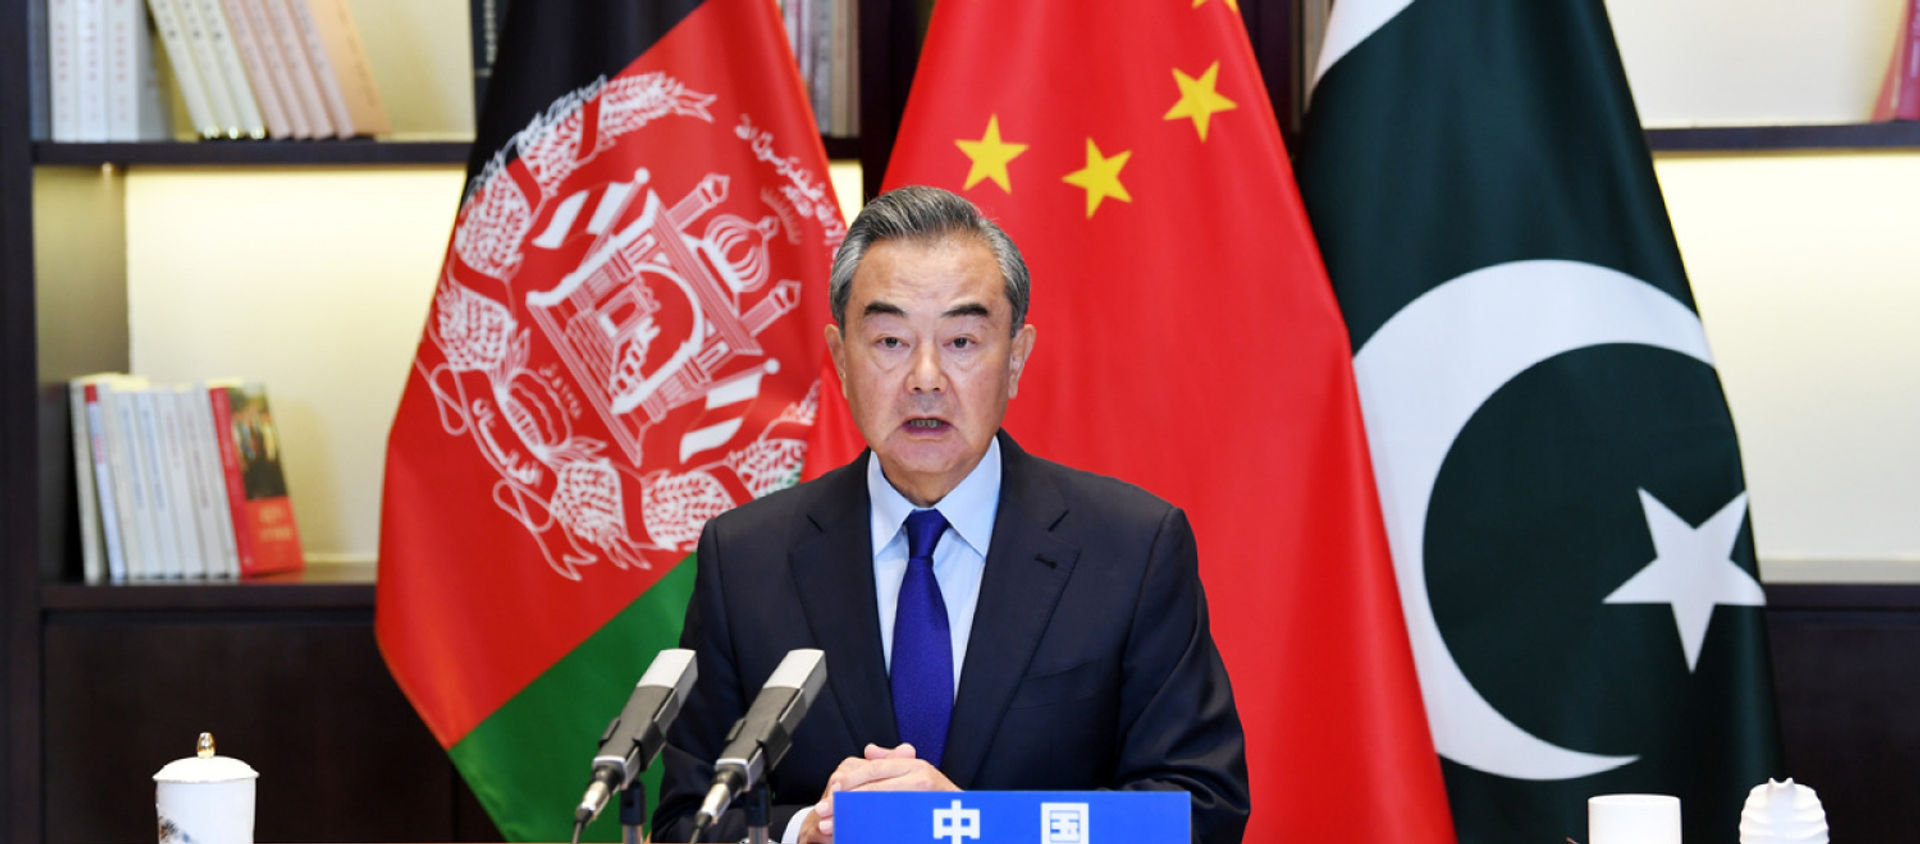 Chinese State Councilor and Foreign Minister Wang Yi hosts the 4th China-Afghanistan-Pakistan Foreign Ministers' Dialogue in Guiyang on June 4, 2021 - Sputnik International, 1920, 24.08.2021